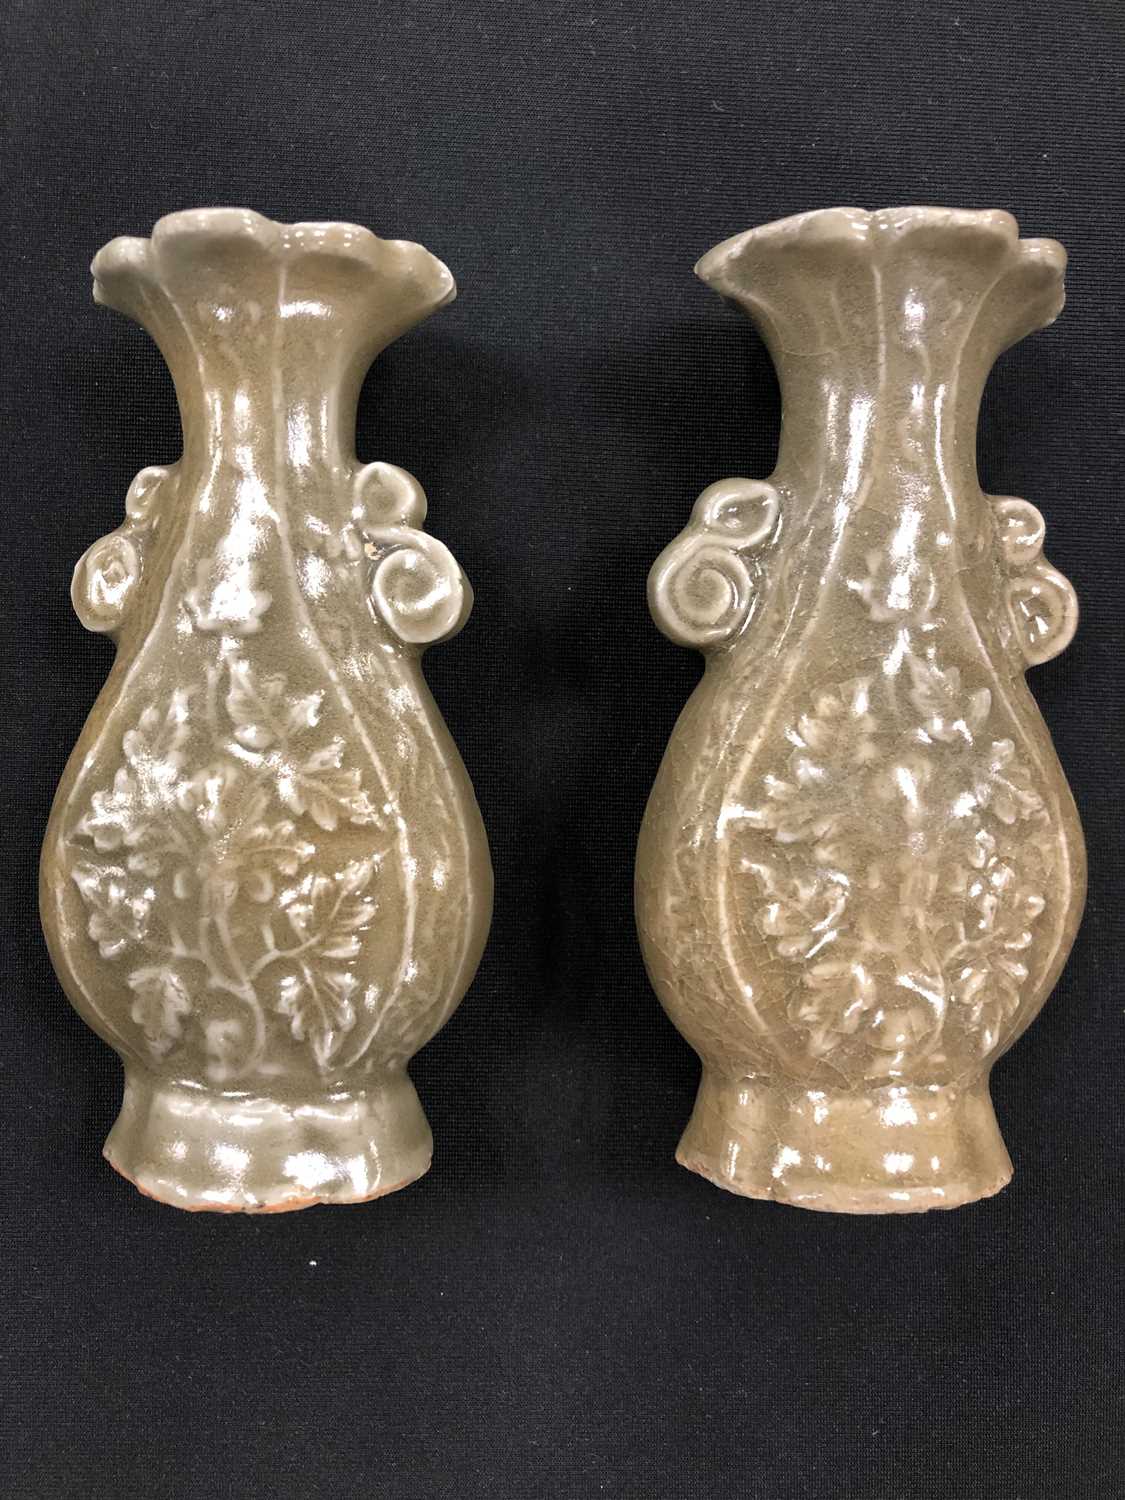 A pair of Longquan celadon vases, Yuan Dynasty - Image 5 of 7